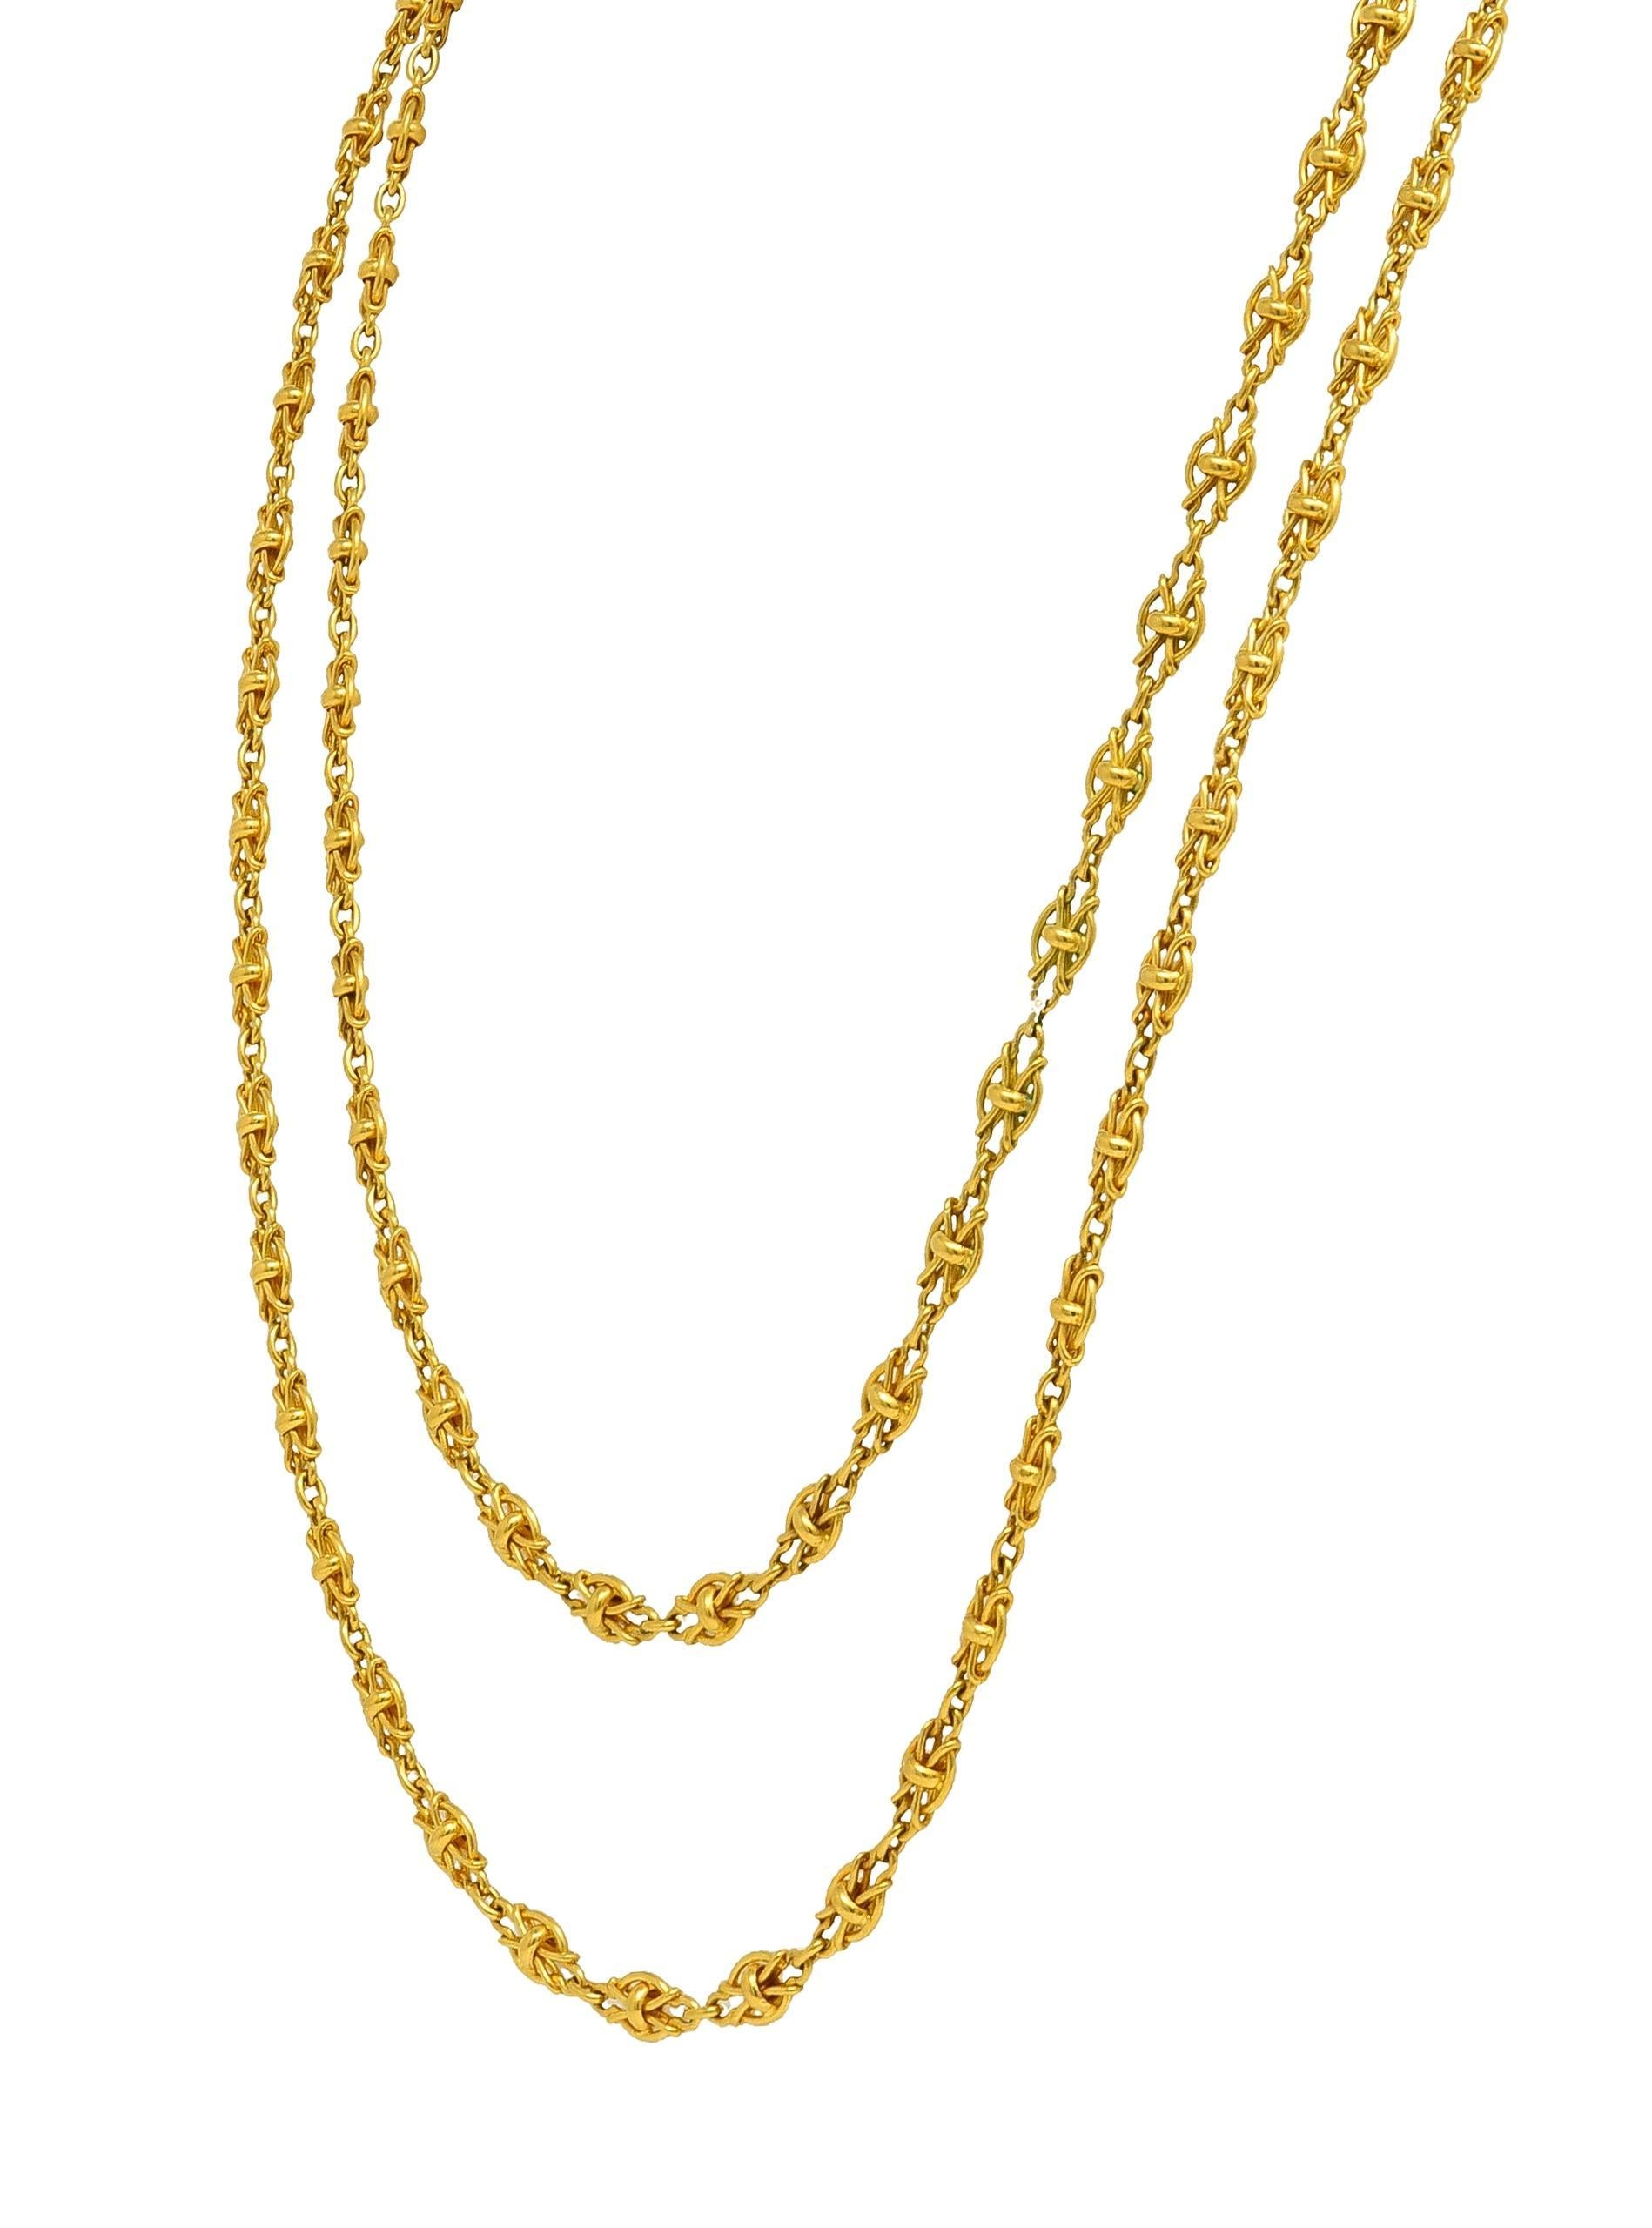 Victorian French 18 Karat Yellow Gold Knot Link Long Antique Chain Necklace For Sale 1